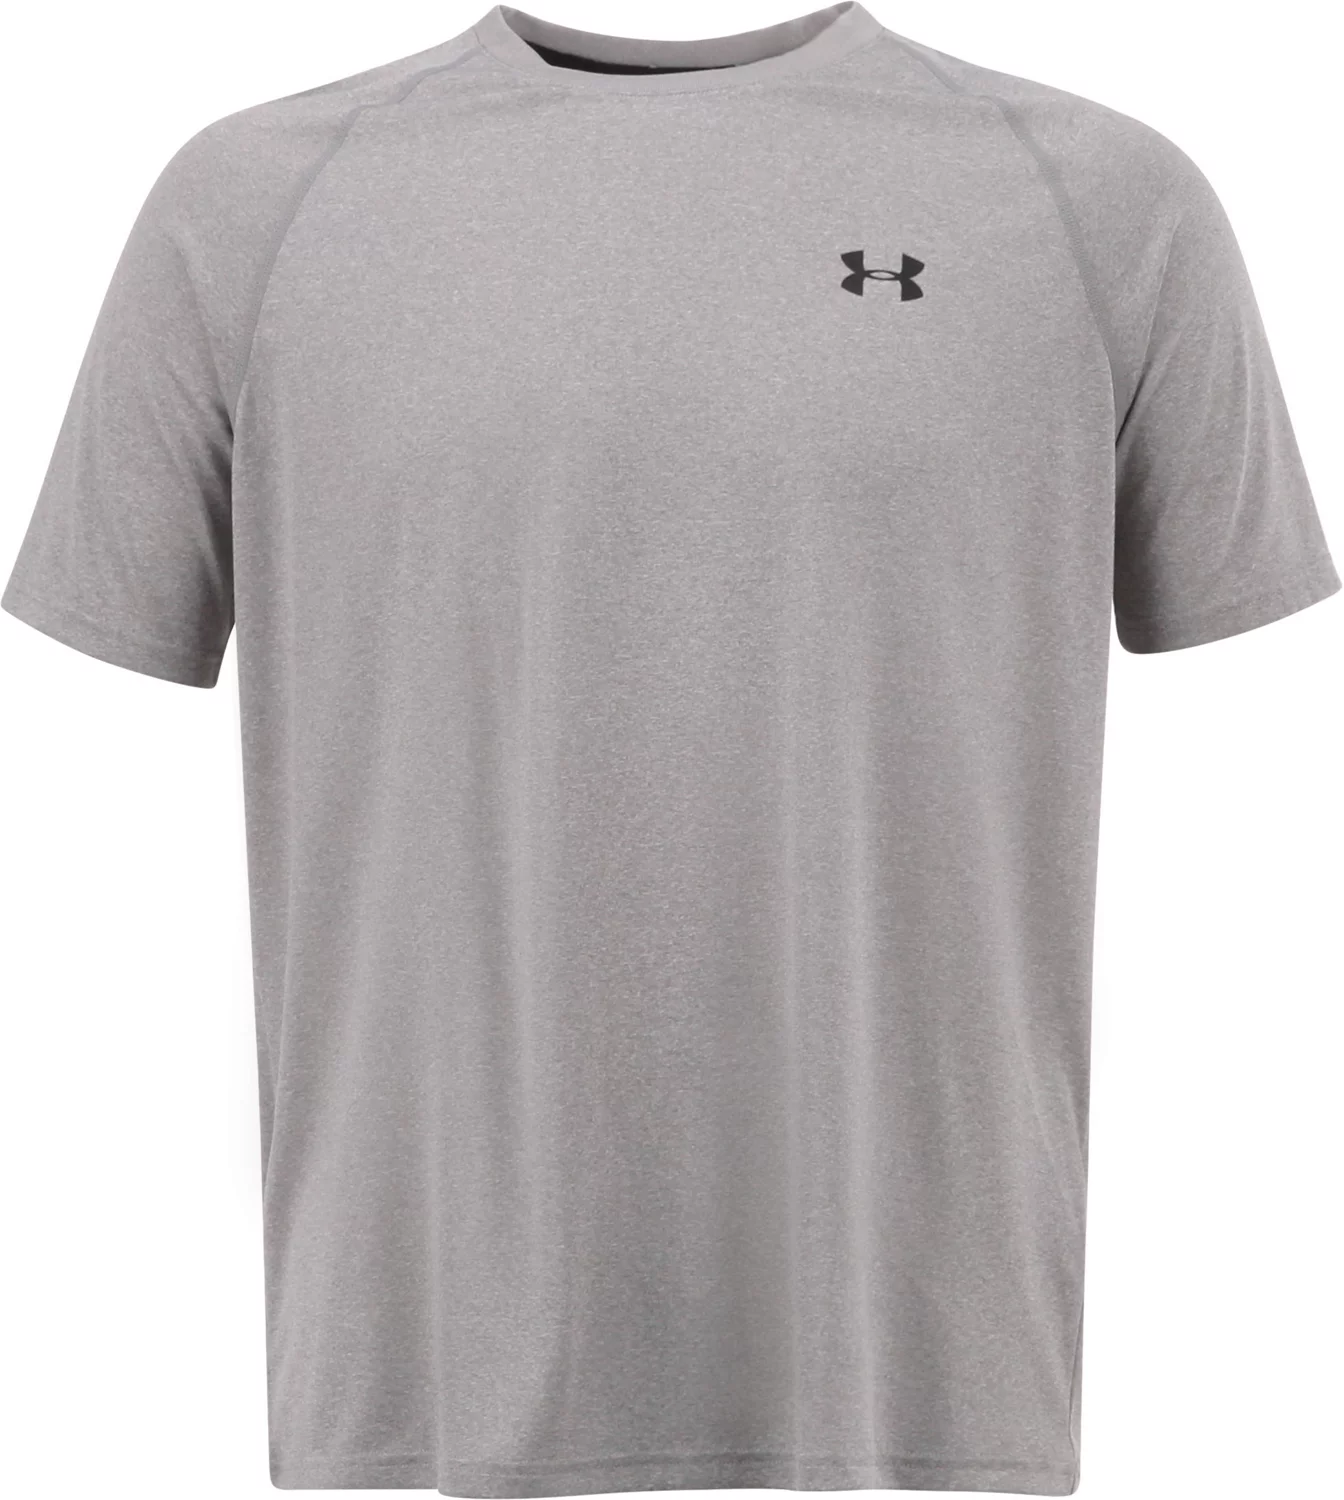 under armor shirts cheap Sale,up to 65 